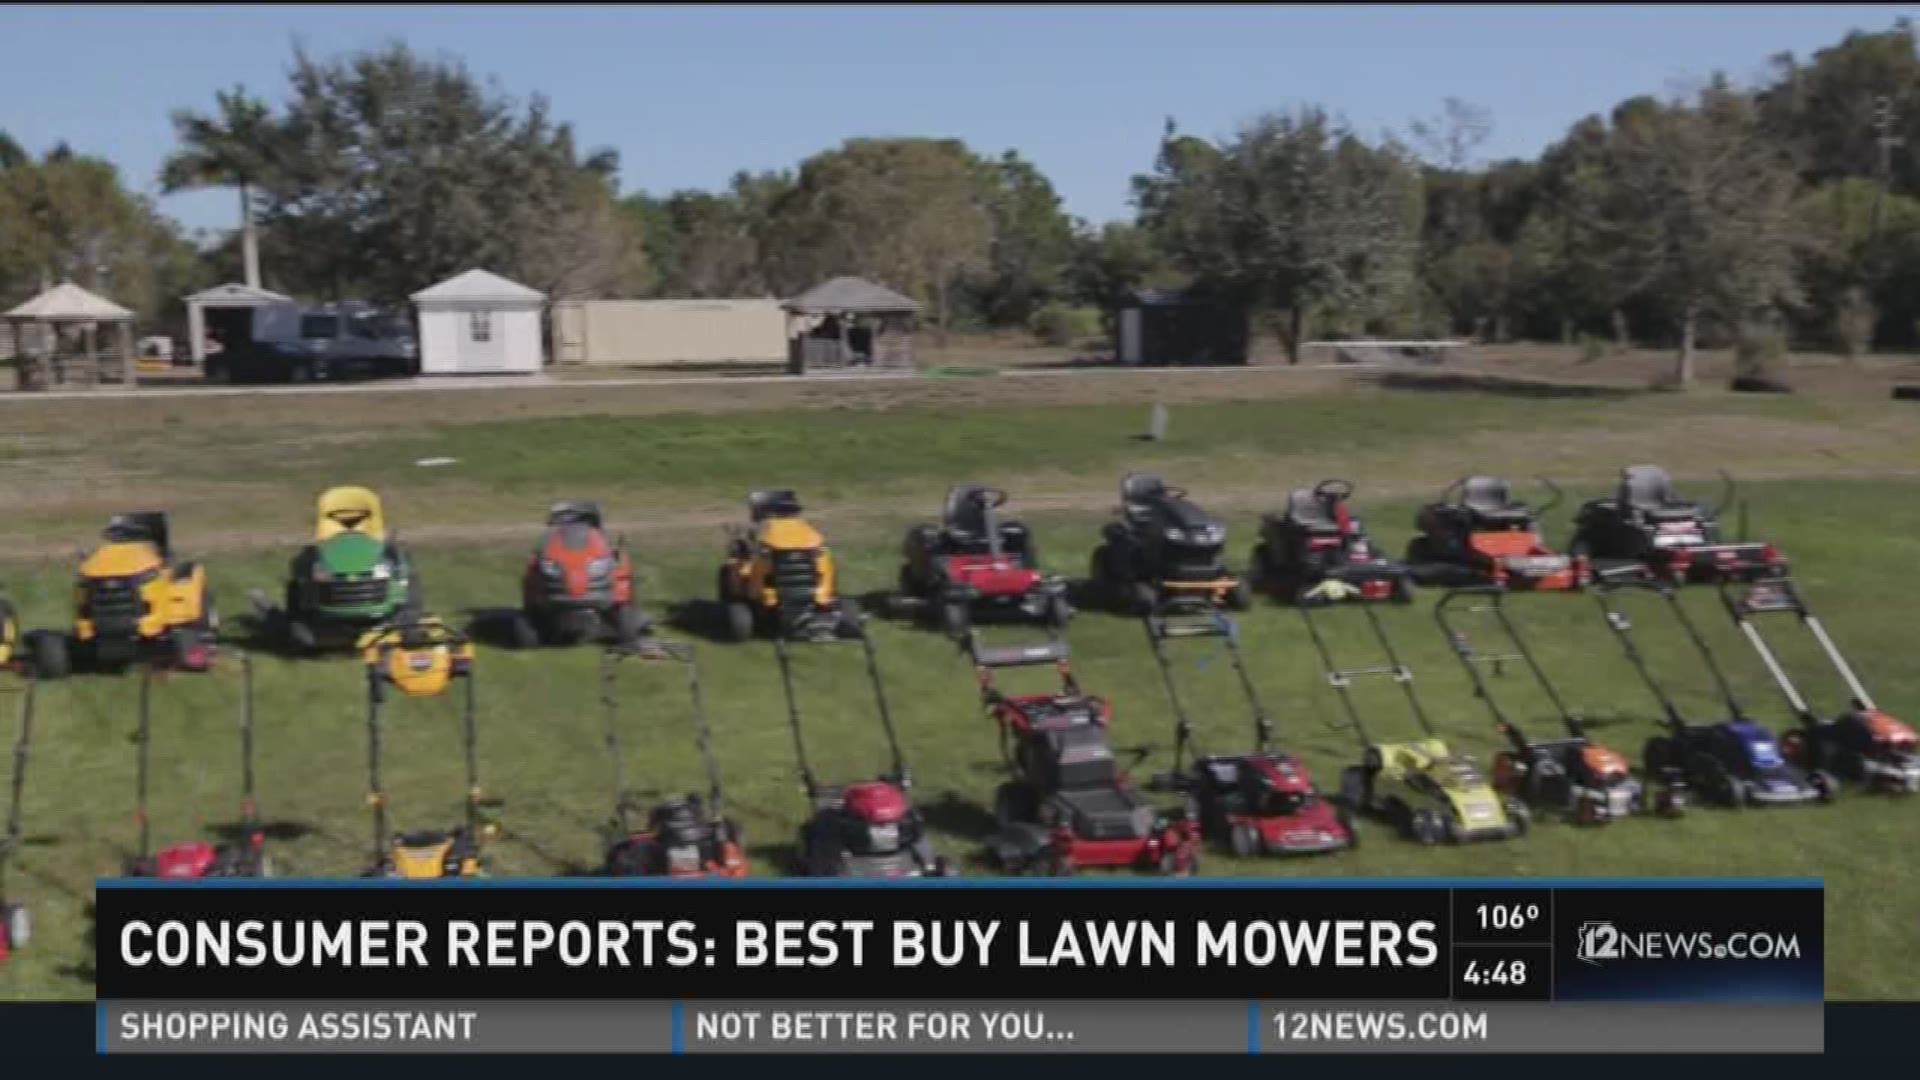 Consumer Reports recommends the best lawn mowers in a range of prices.